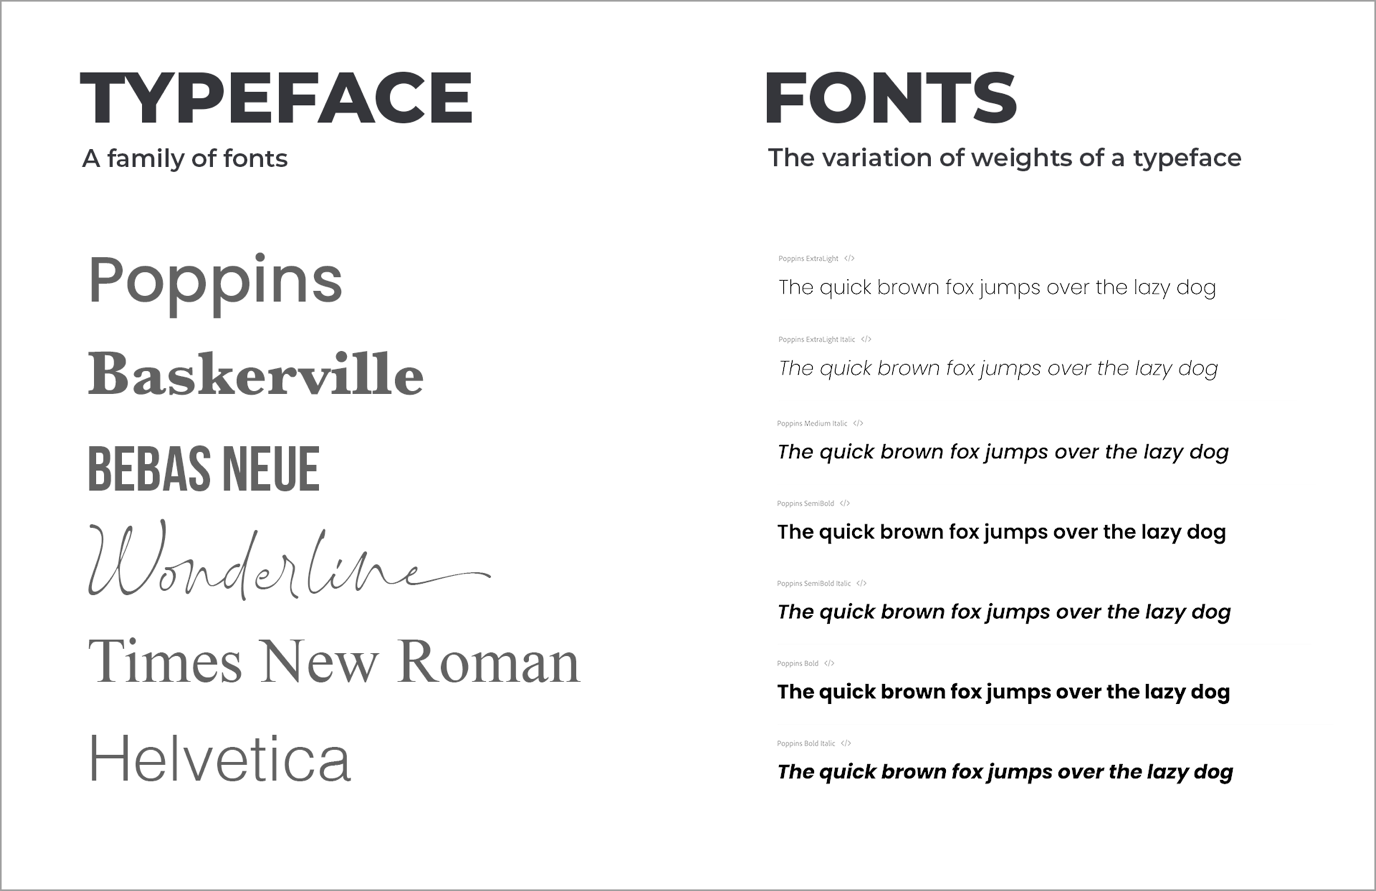 Typefaces and fonts